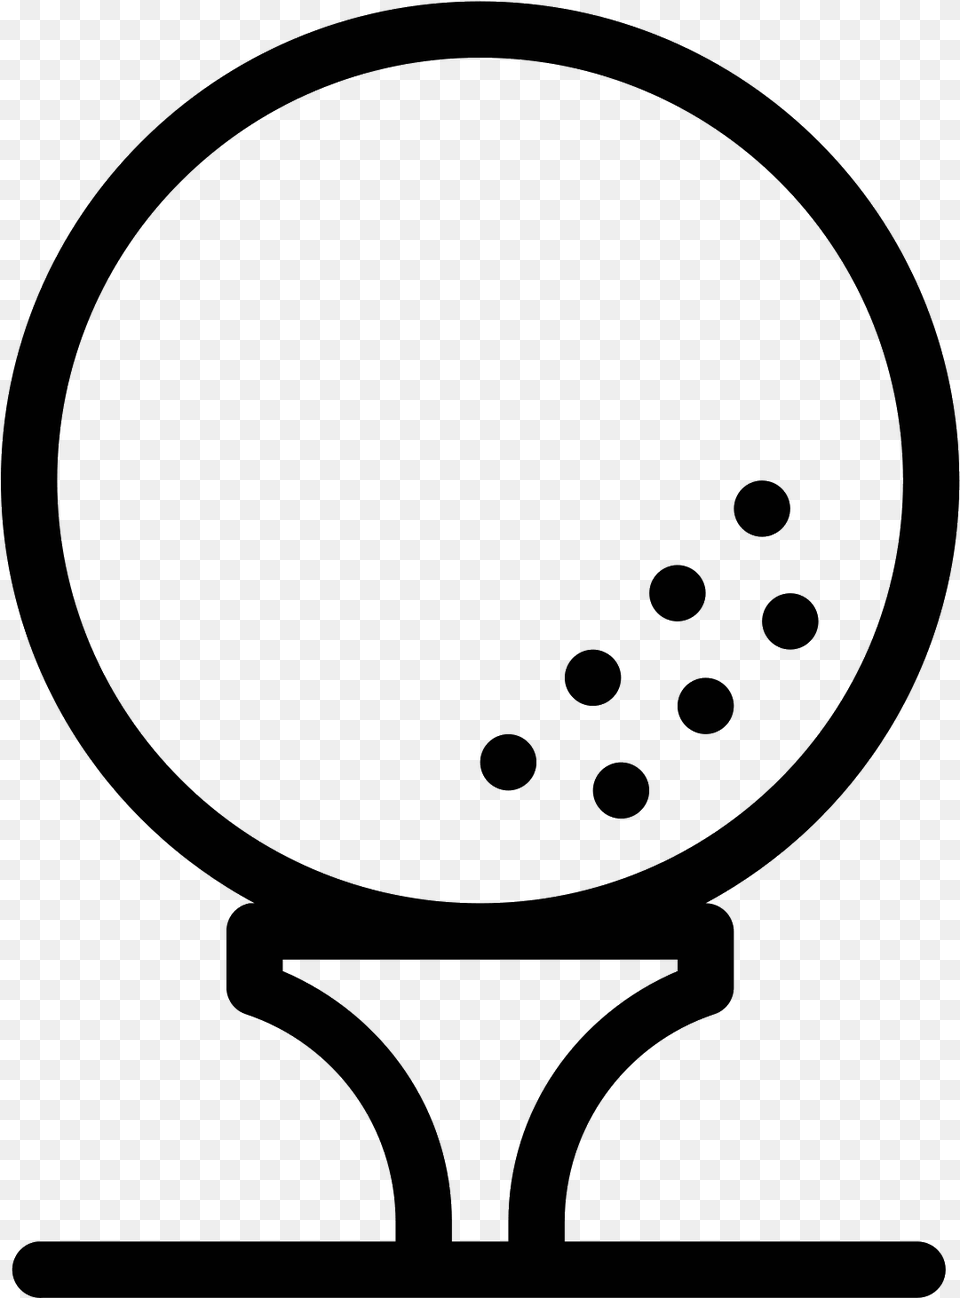 This Is A Golf Ball Resting On A Golf Tee Golf Ball Svg, Gray Free Png